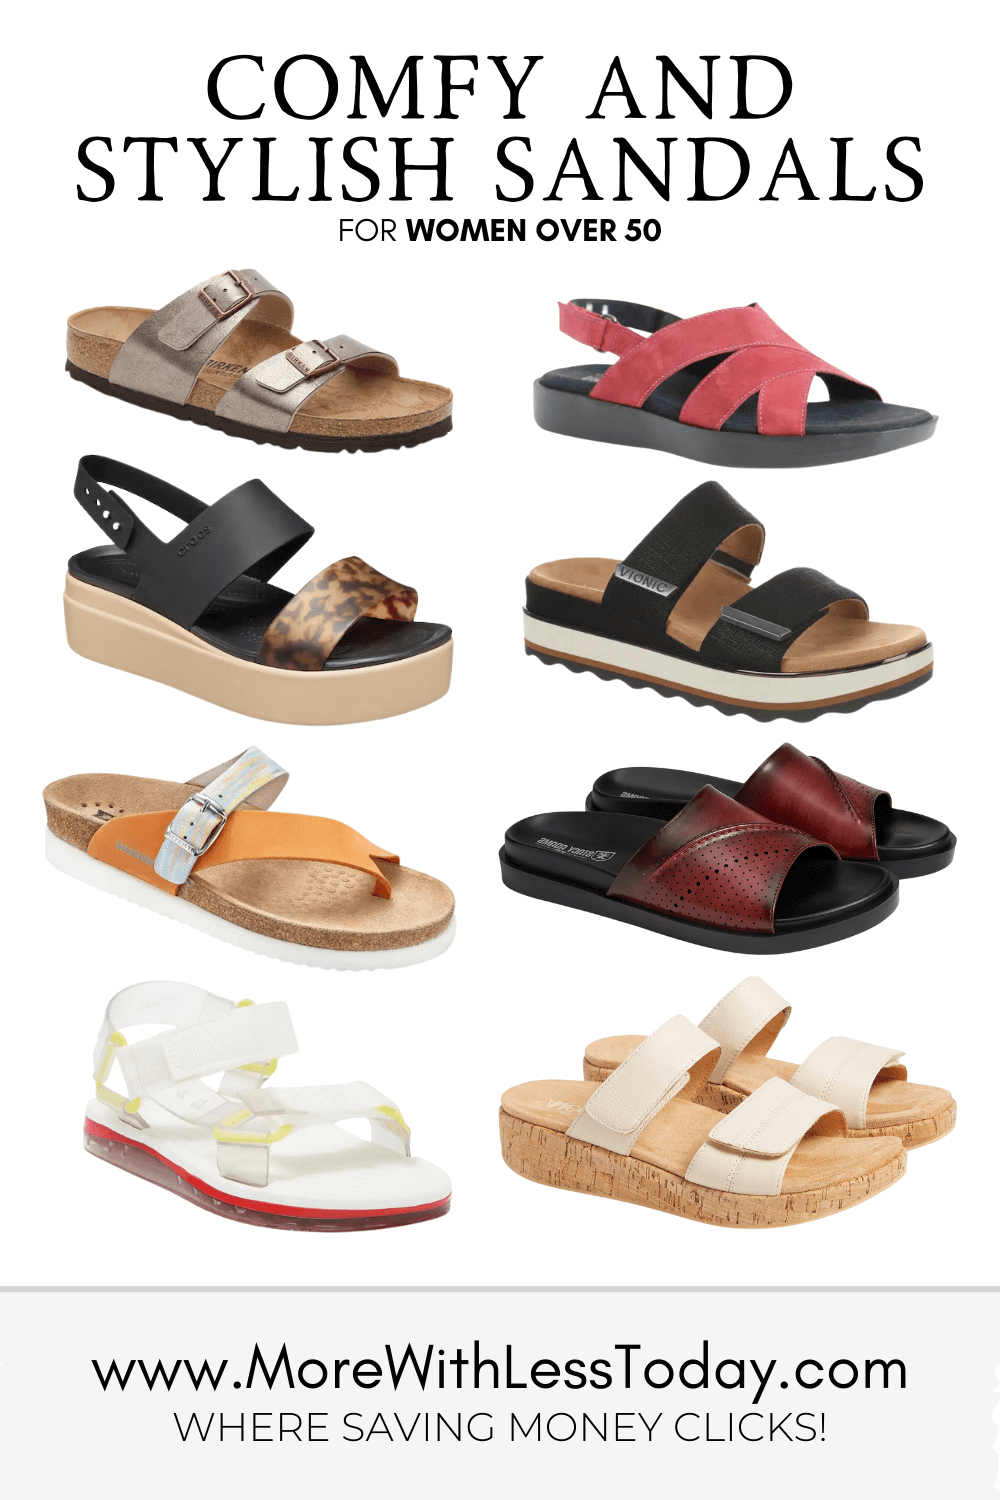 Comfy and Stylish Sandals for Women Over 50 - PIN